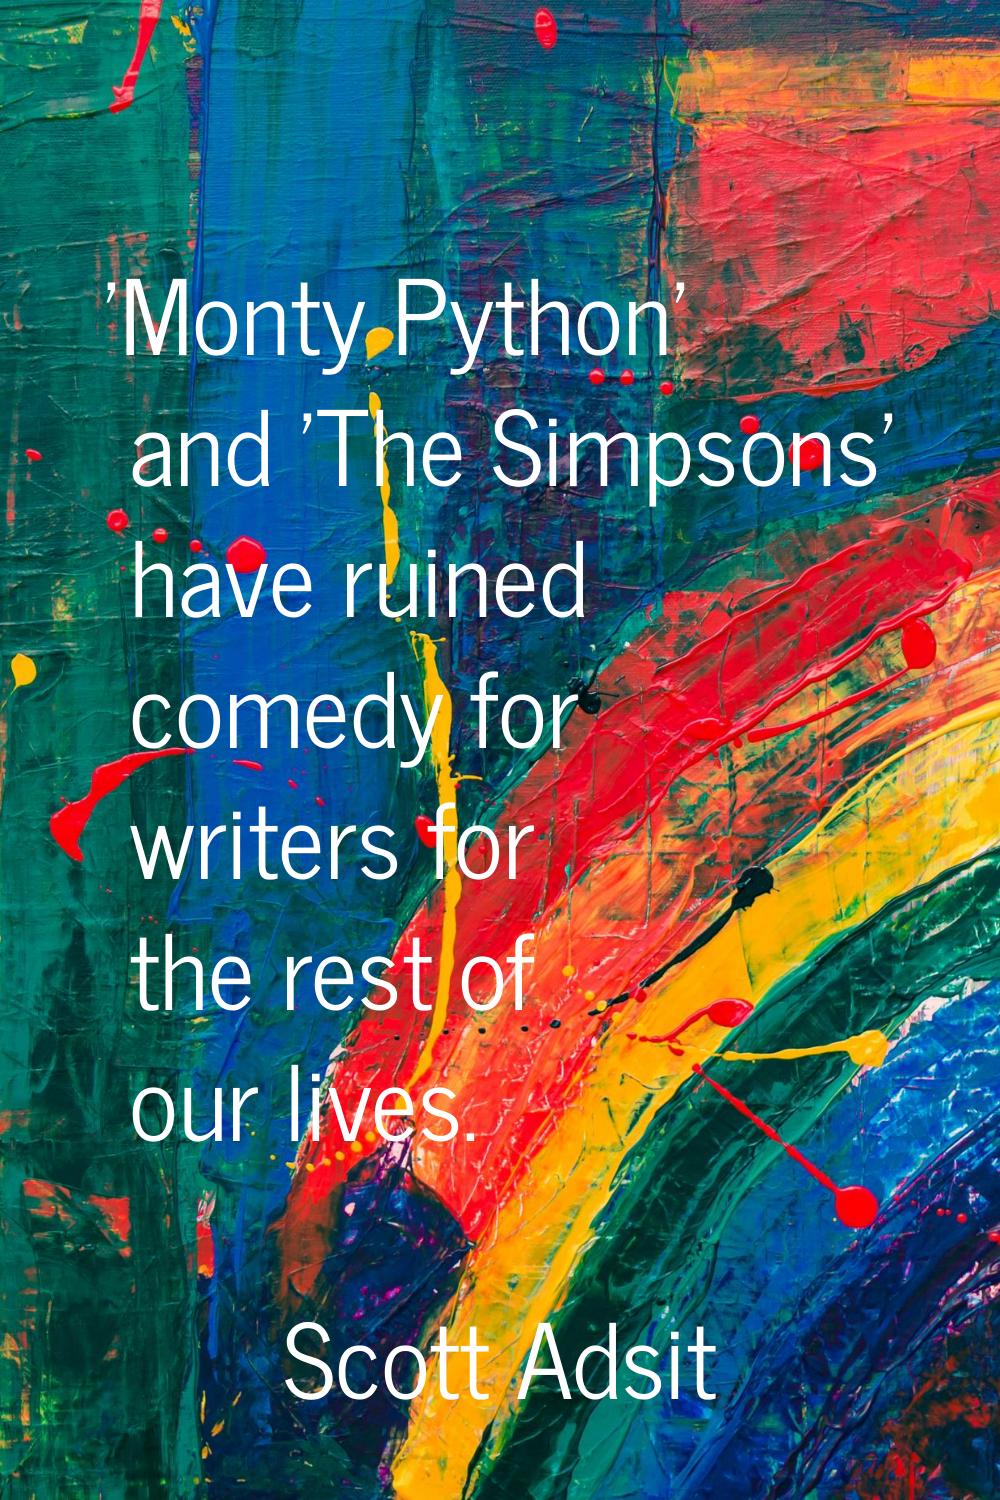 'Monty Python' and 'The Simpsons' have ruined comedy for writers for the rest of our lives.